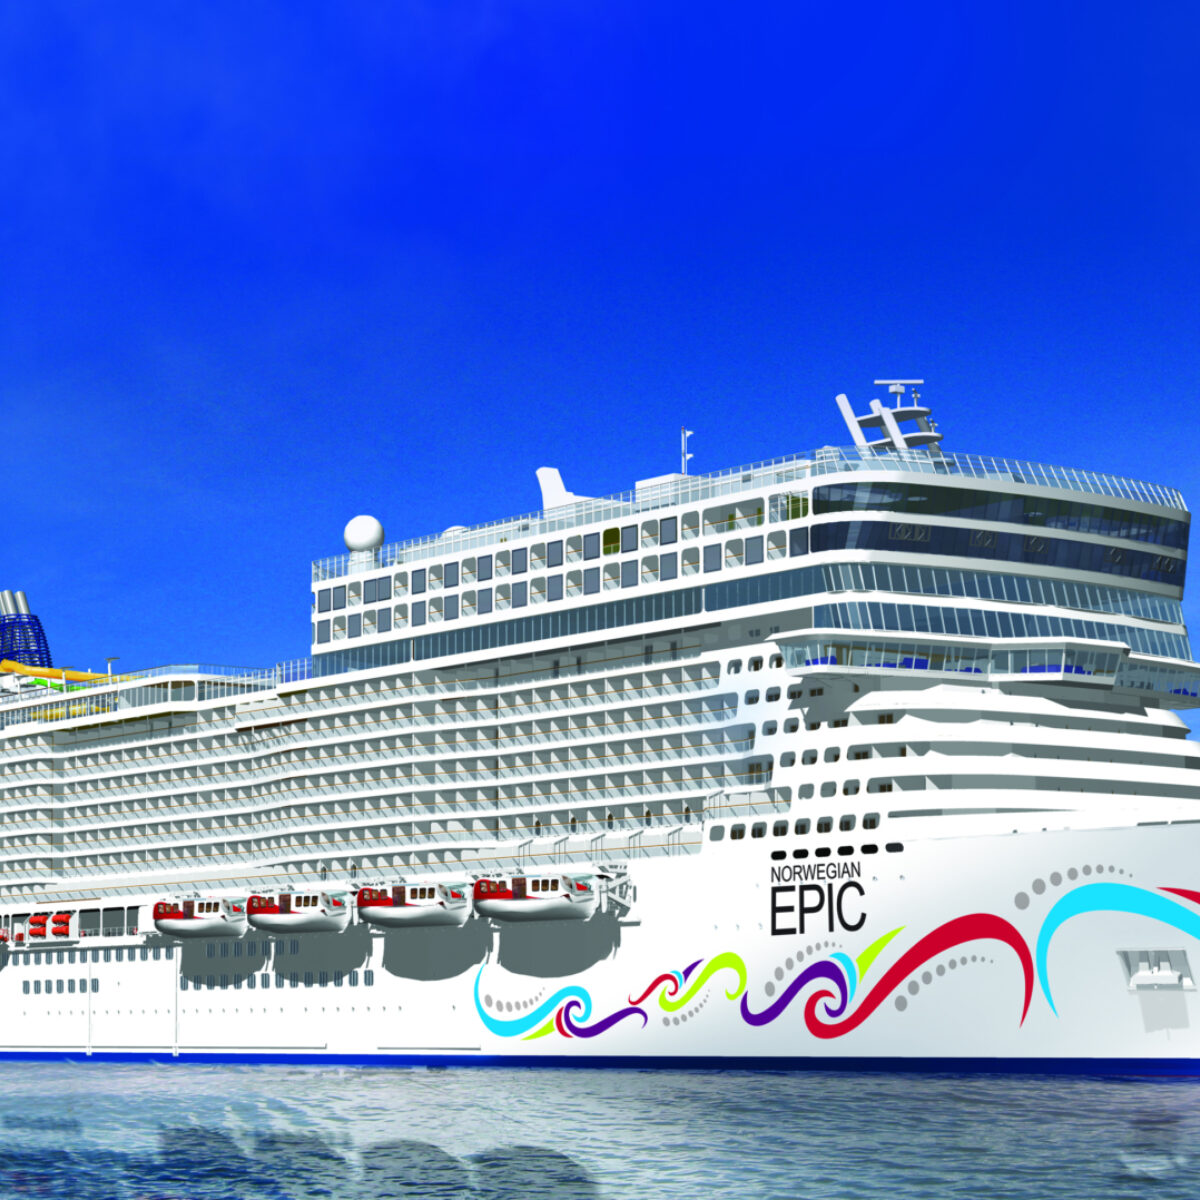 Jets reference MA norwegian epic epic starboard w9c44dd8f527d495ba2231aaf9bbdc631